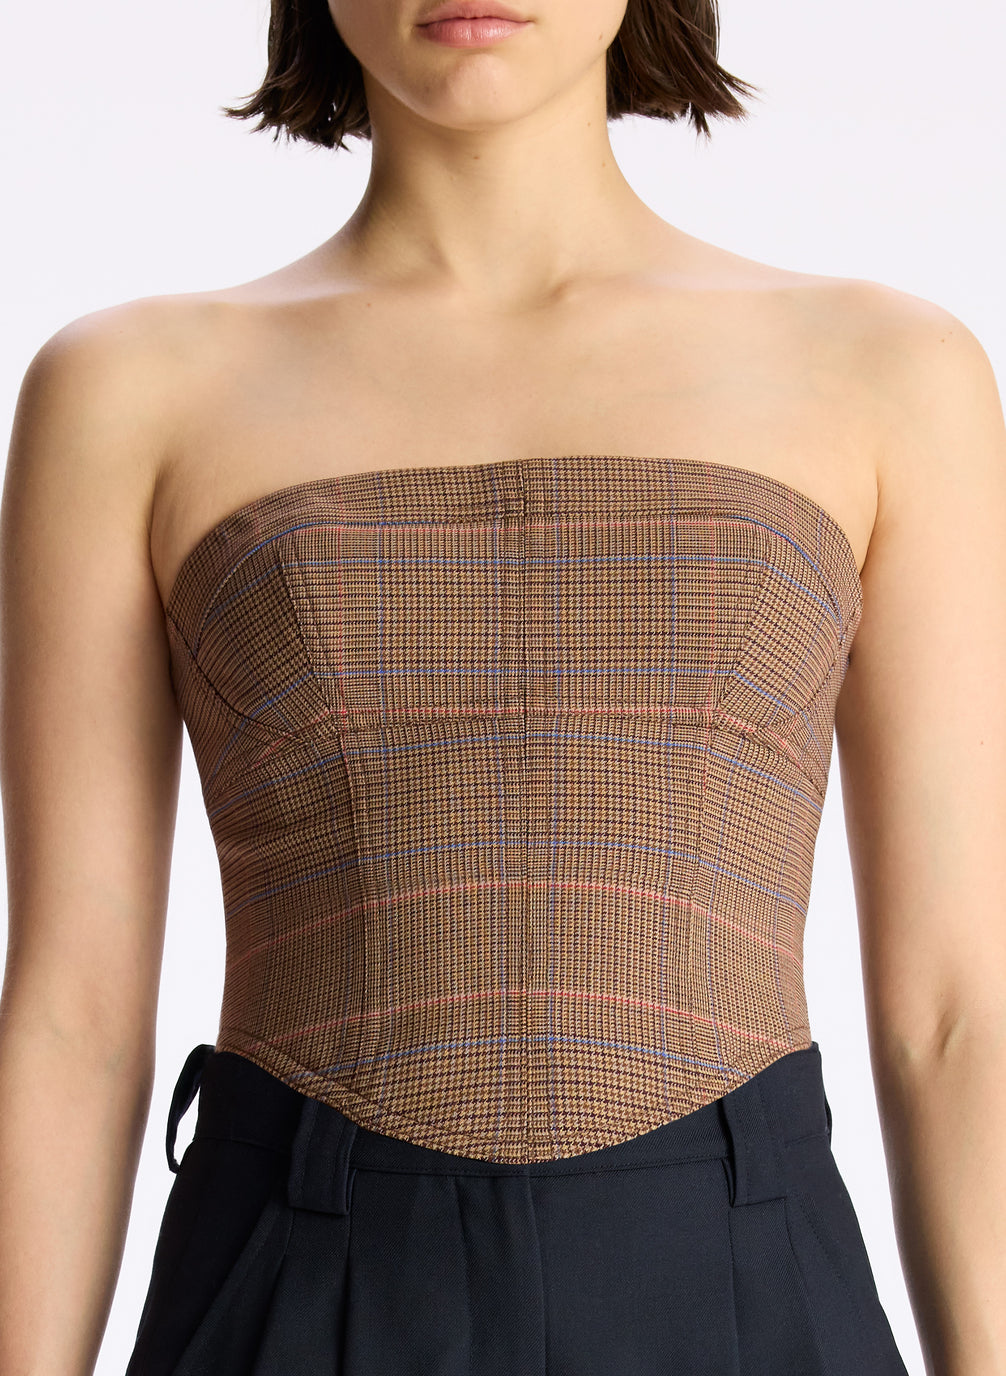 detail view of woman wearing brown plaid strapless top and black pants